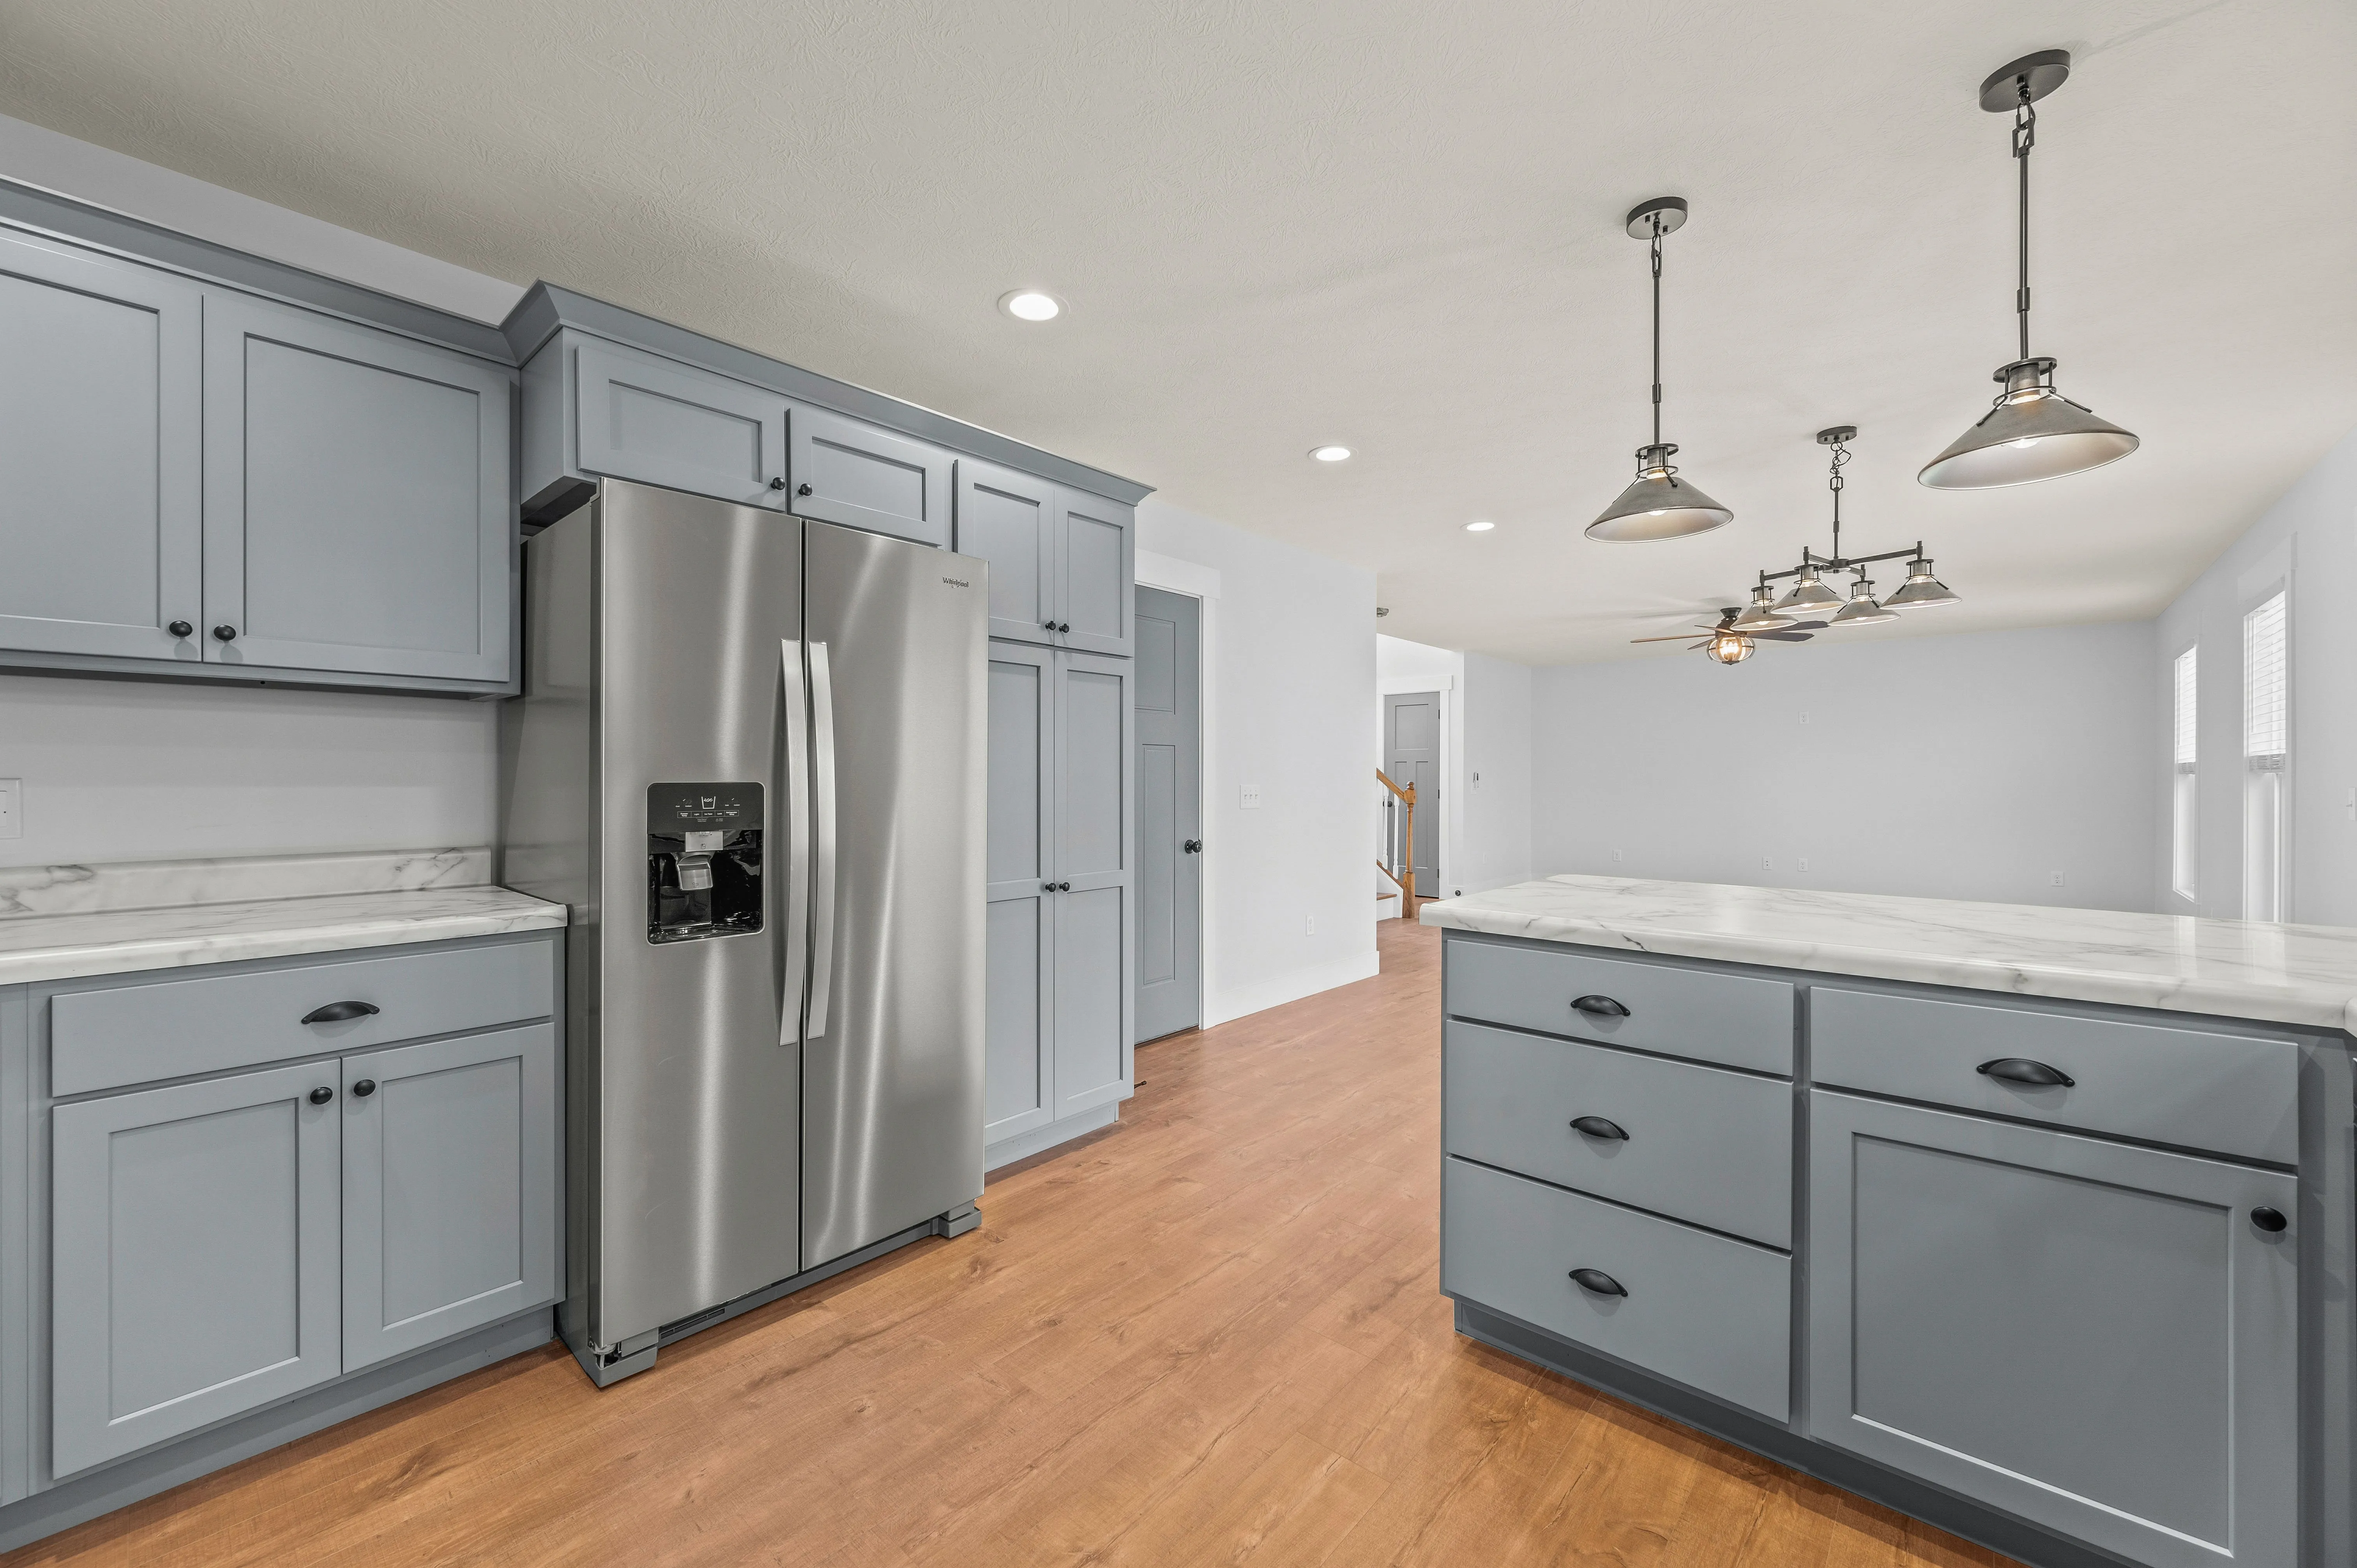 Modern kitchen interior with gray cabinets, stainless steel refrigerator, hardwood floors, and pendant lighting.